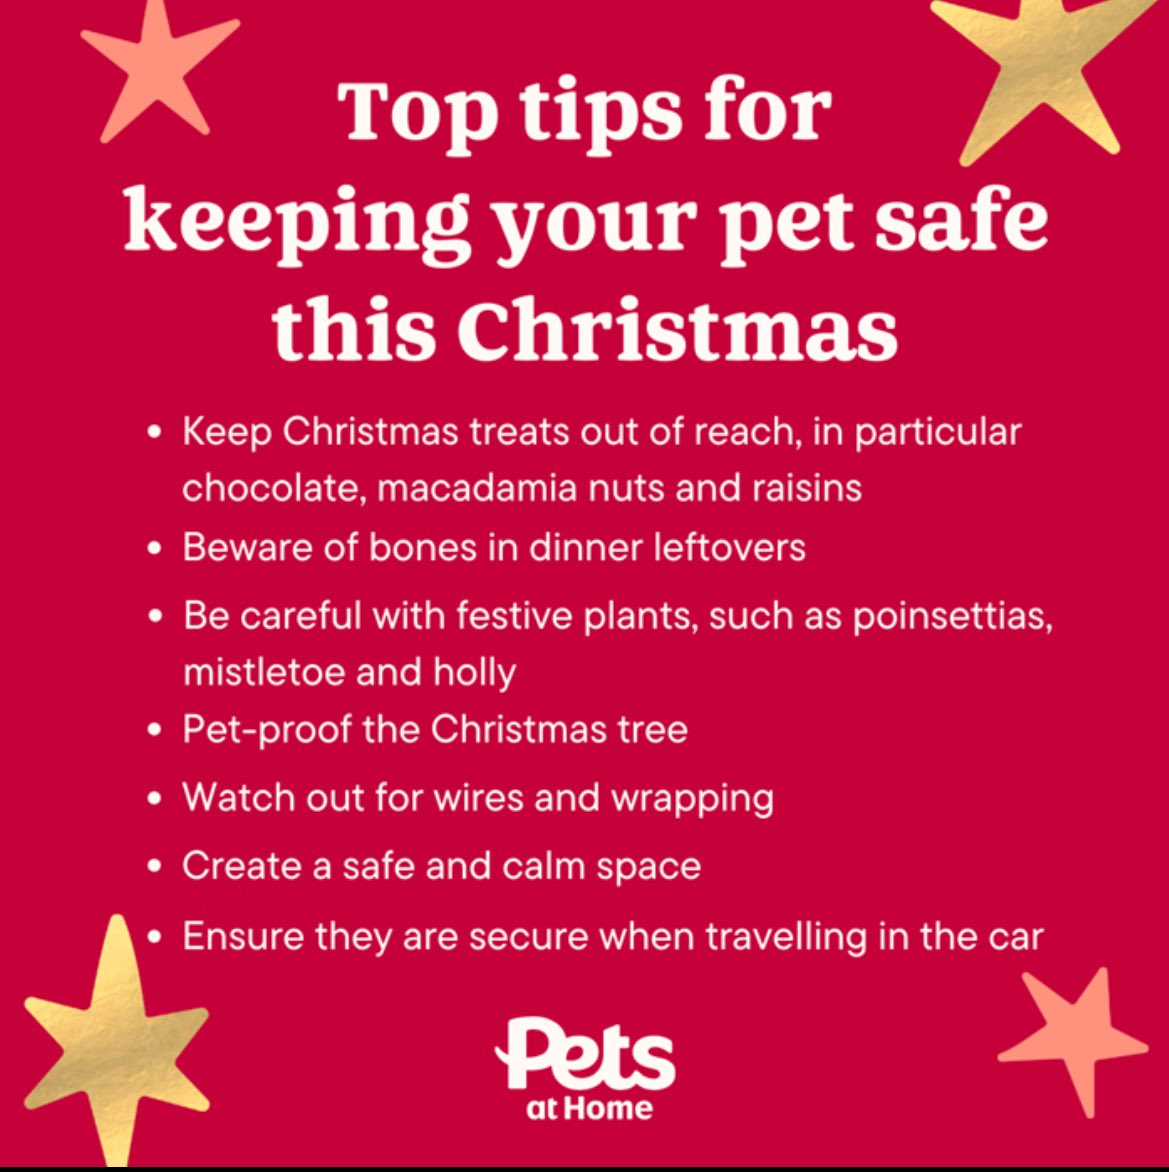 Christmas can be a magical time to spend with our pets.   But we need to be mindful about the impact that celebrations can have on them.   @PetsatHome has shared some top tips to help us all keep pets healthy and happy this holiday season!   Find out more: bit.ly/3TvGaip